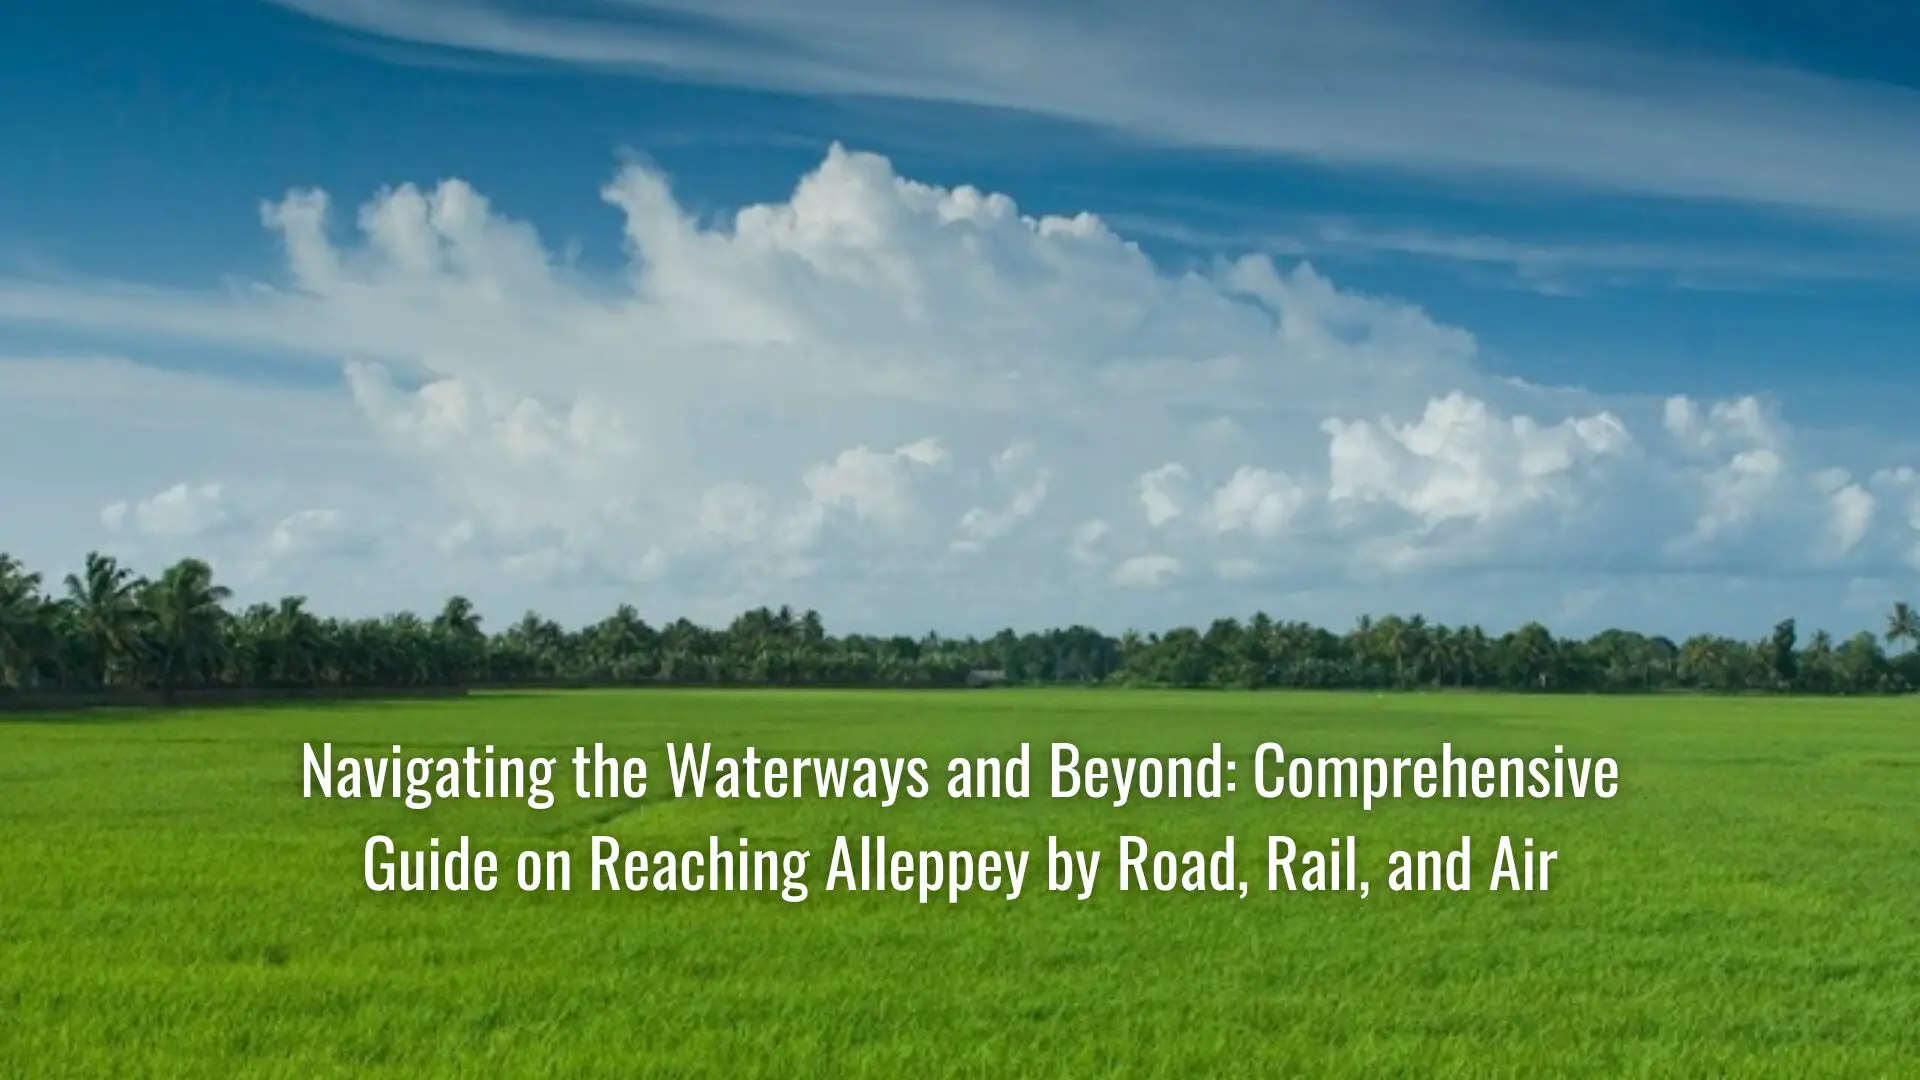 Navigating the Waterways and Beyond: Comprehensive Guide on Reaching Alleppey by Road, Rail, and Air